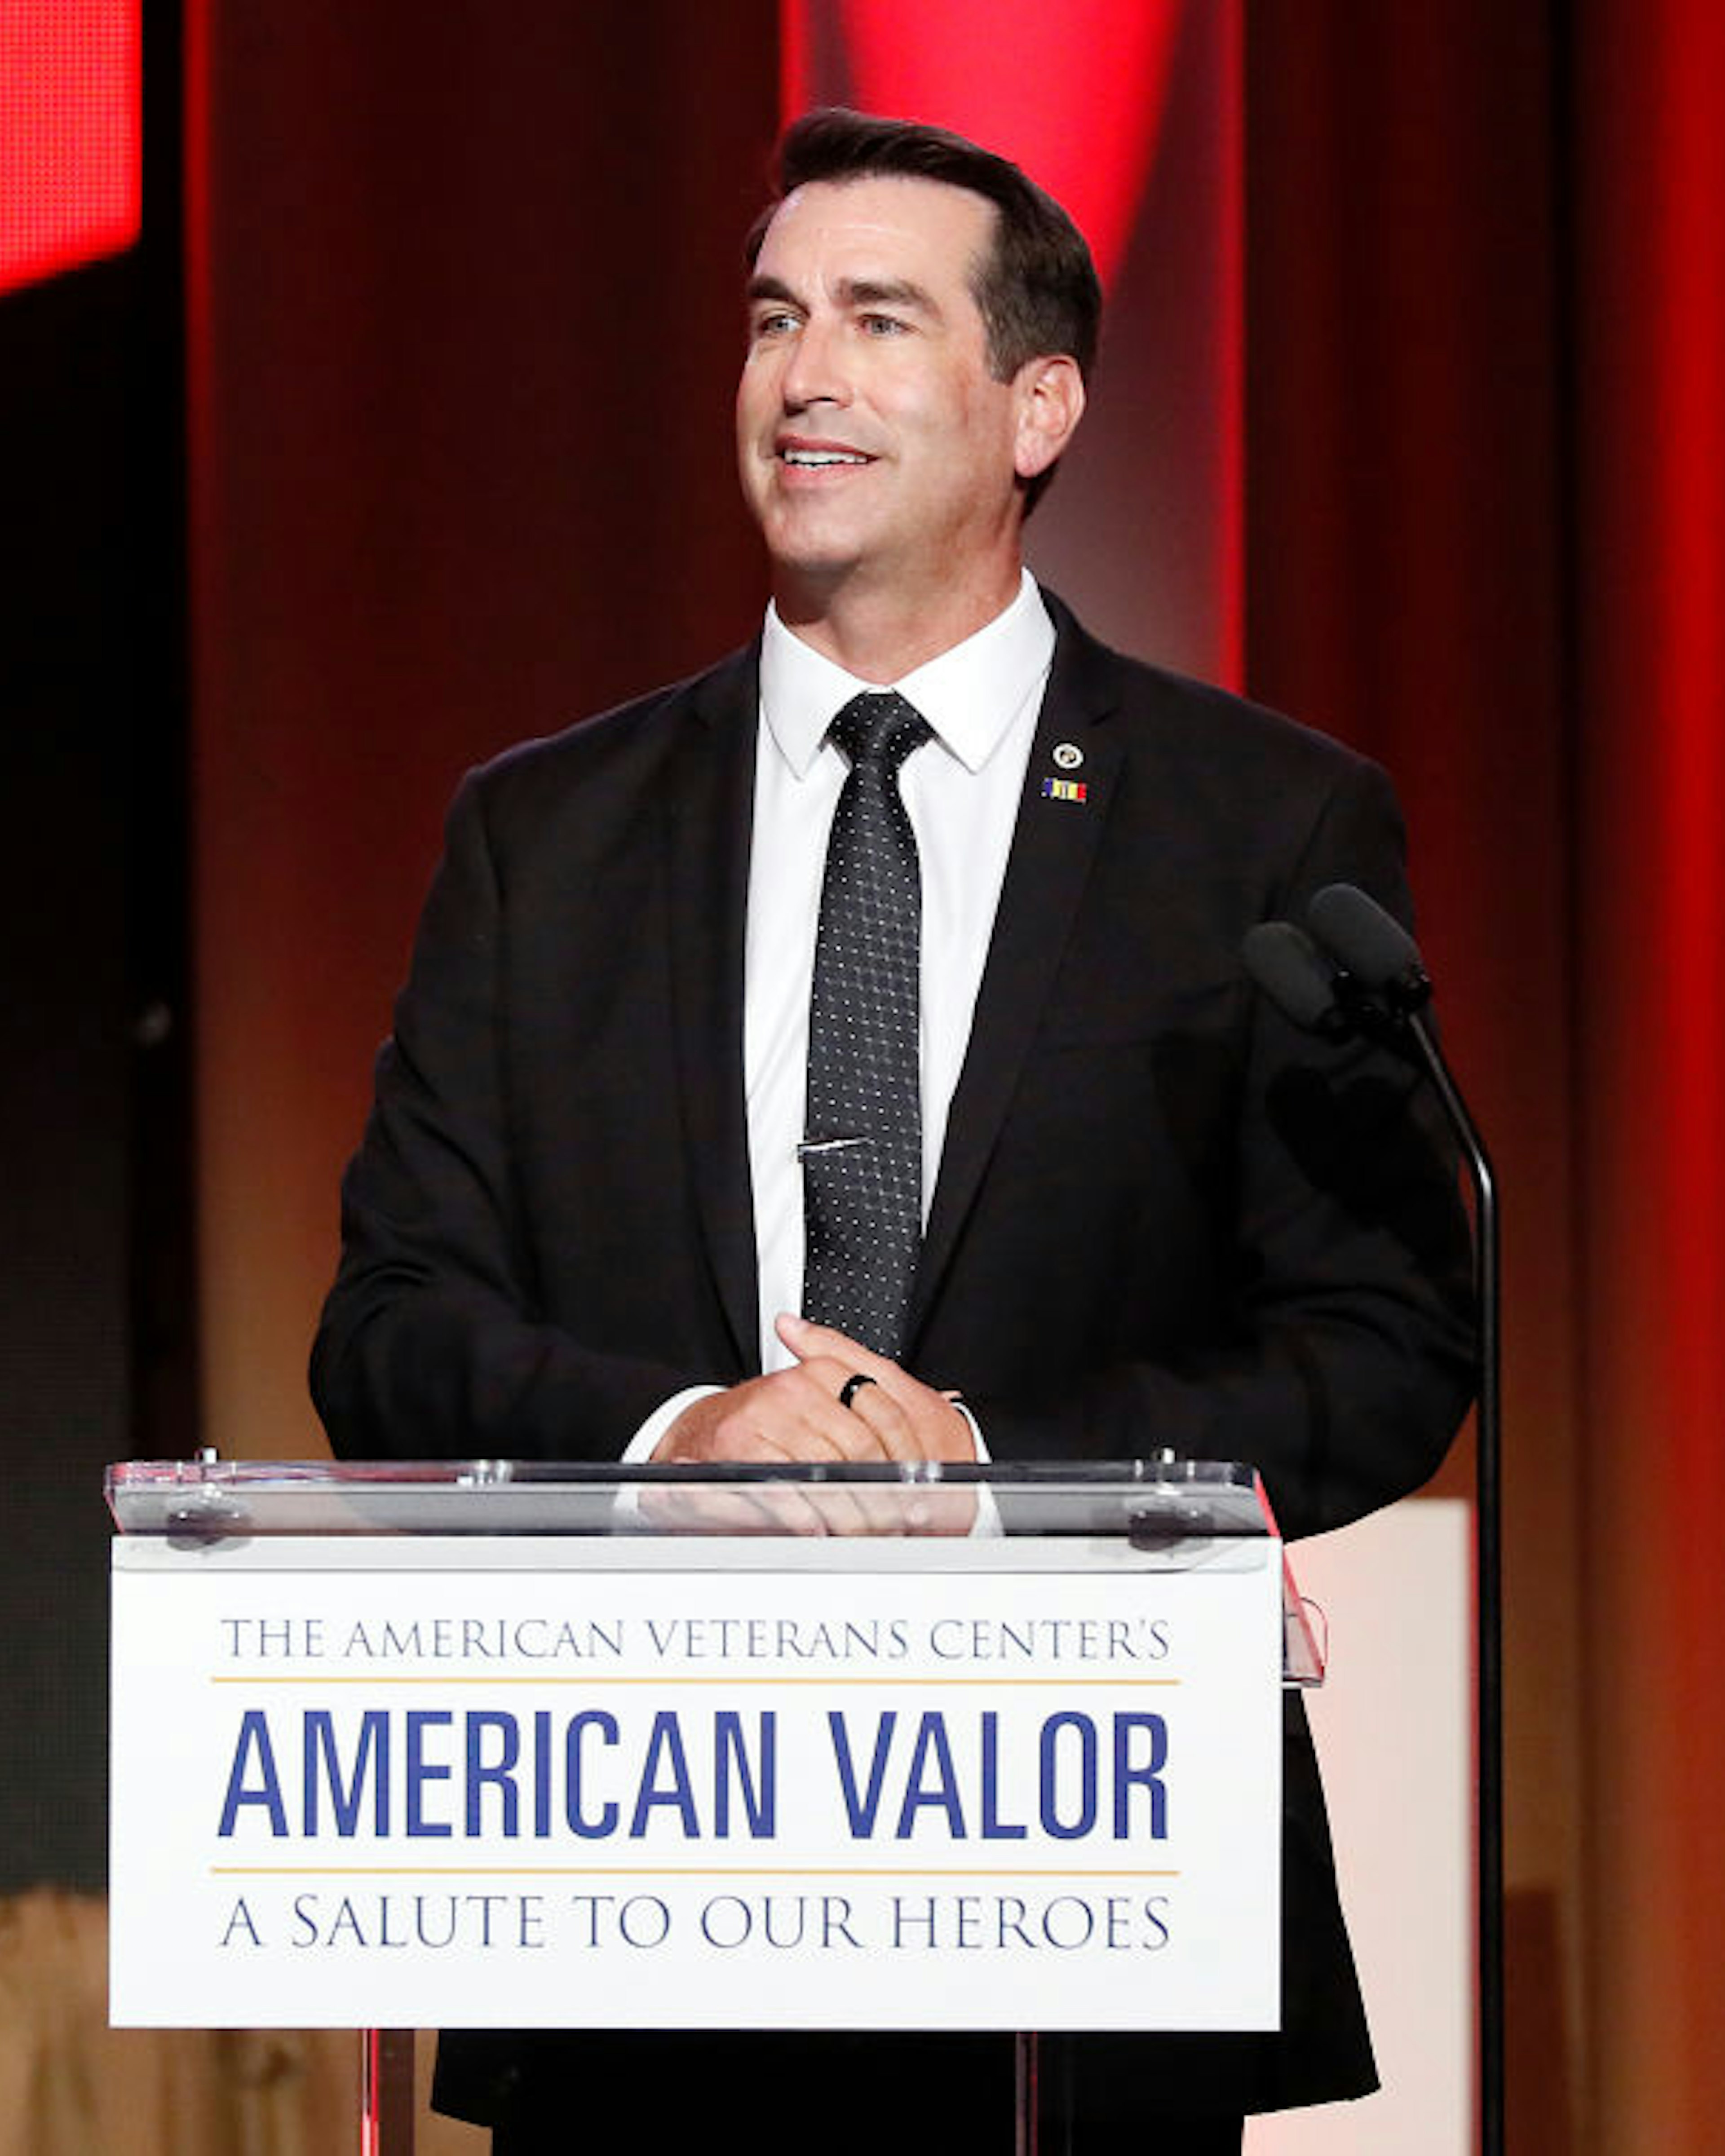 WASHINGTON, DC - OCTOBER 26: Actor/retired United States Marine Corps Reserve officer Rob Riggle speaks at the American Veterans Center’s "2019 American Valor: A Salute to Our Heroes" Veterans Day Special at the Omni Shoreham Hotel on October 26, 2019 in Washington, DC. (Photo by Paul Morigi/Getty Images)